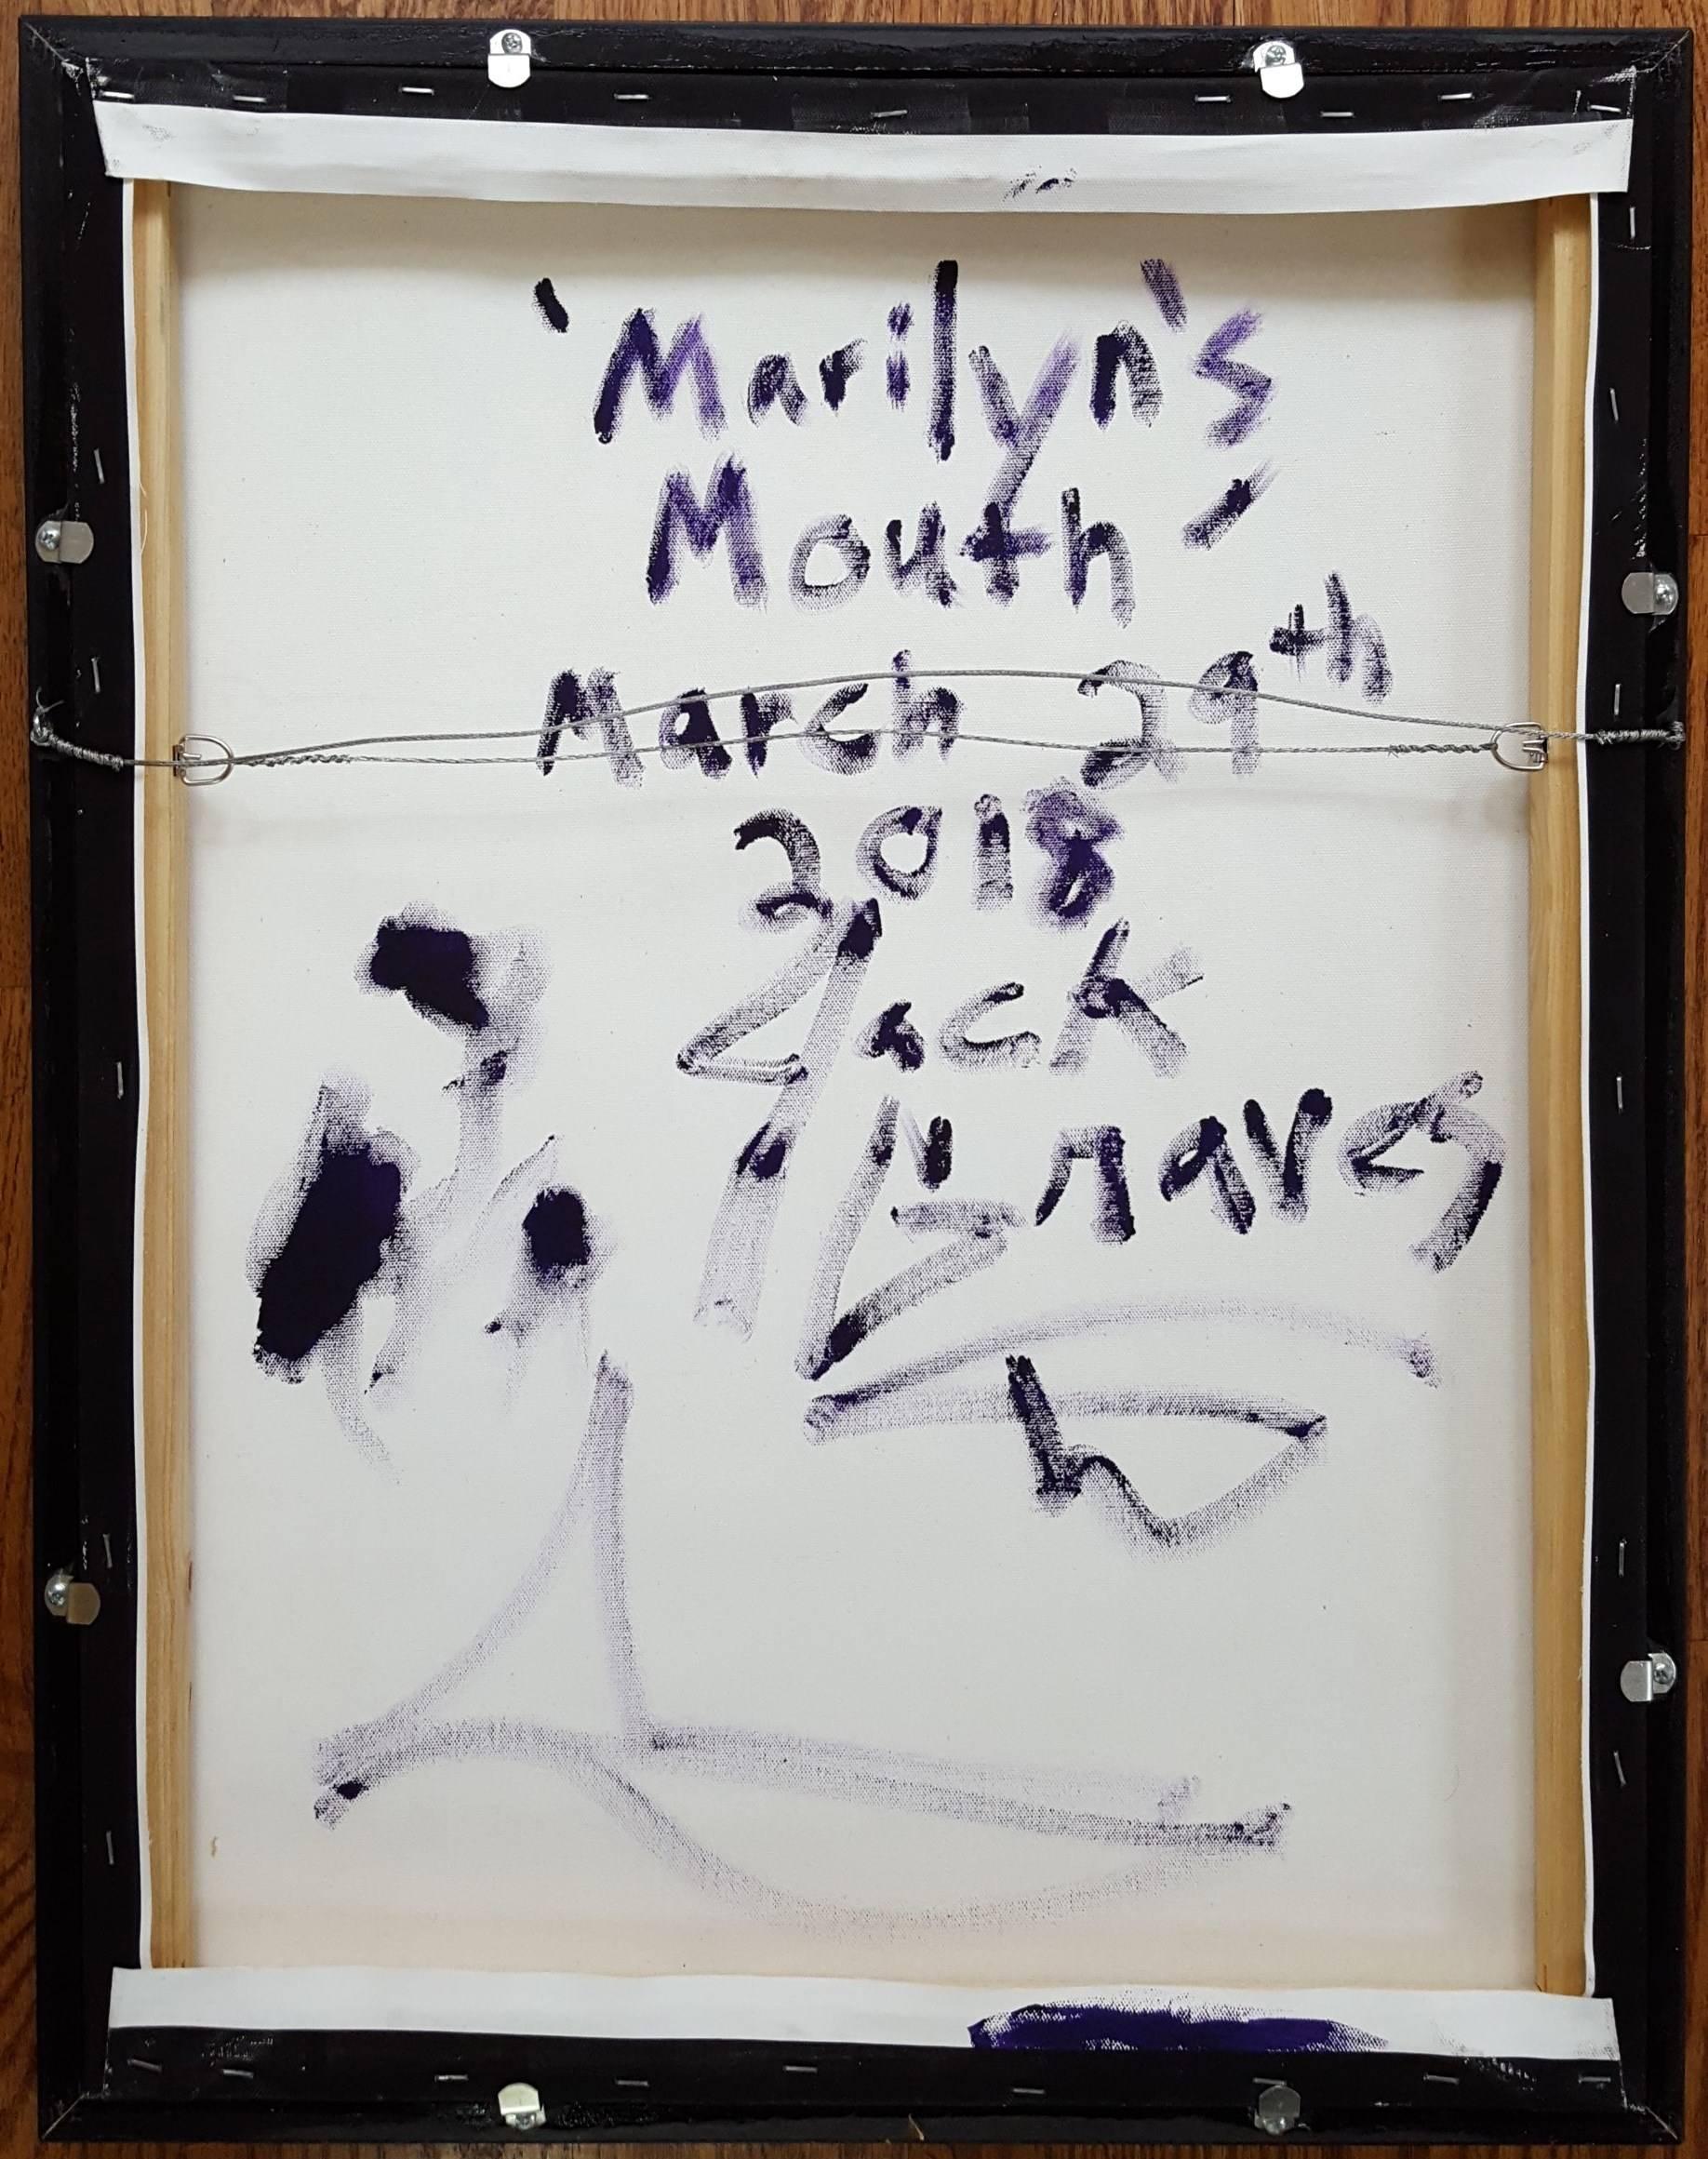 Marilyn's Mouth 5